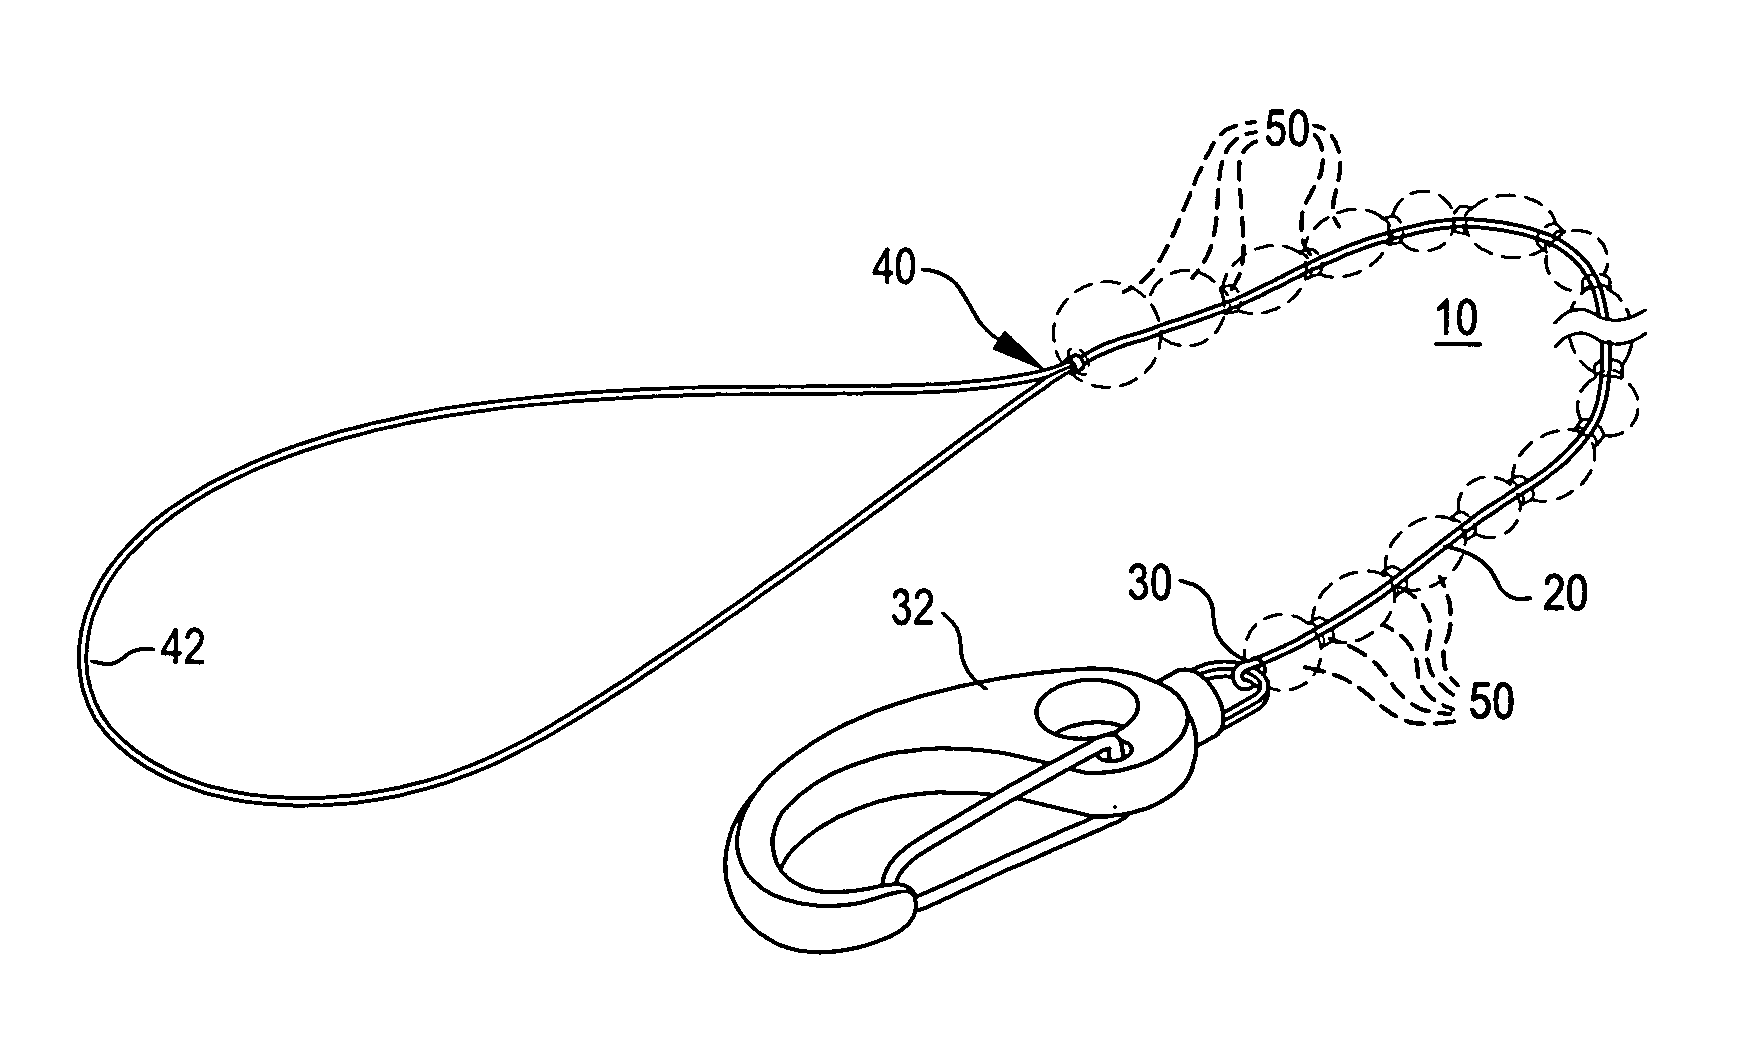 Ornamental leash for portable objects and devices